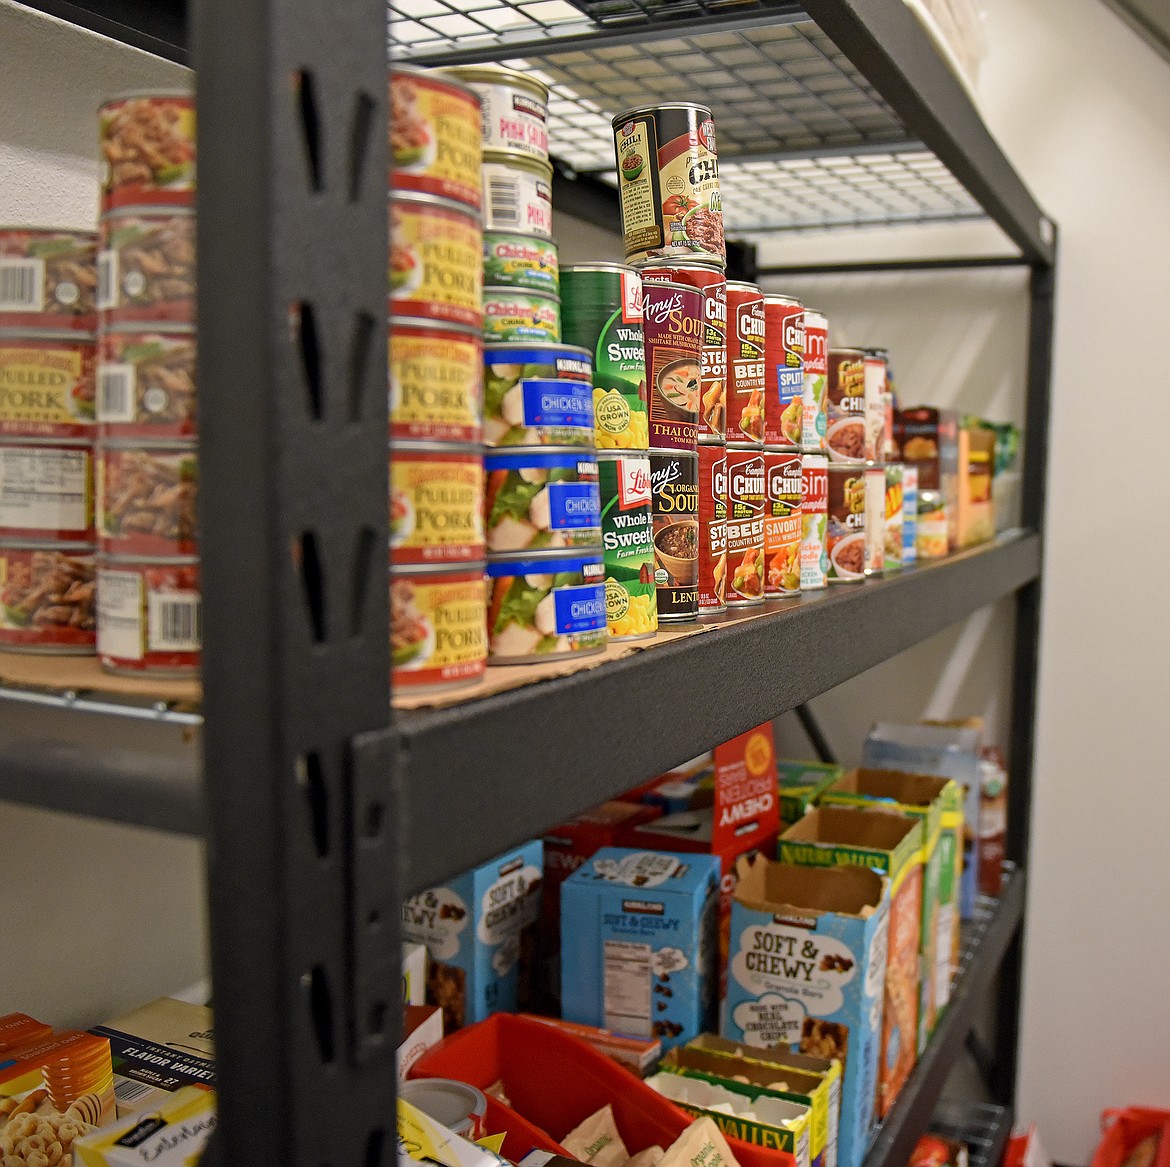 A shelf at the PAWS Pantry lined with canned goods and snacks. (Whitney England/Whitefish Pilot)